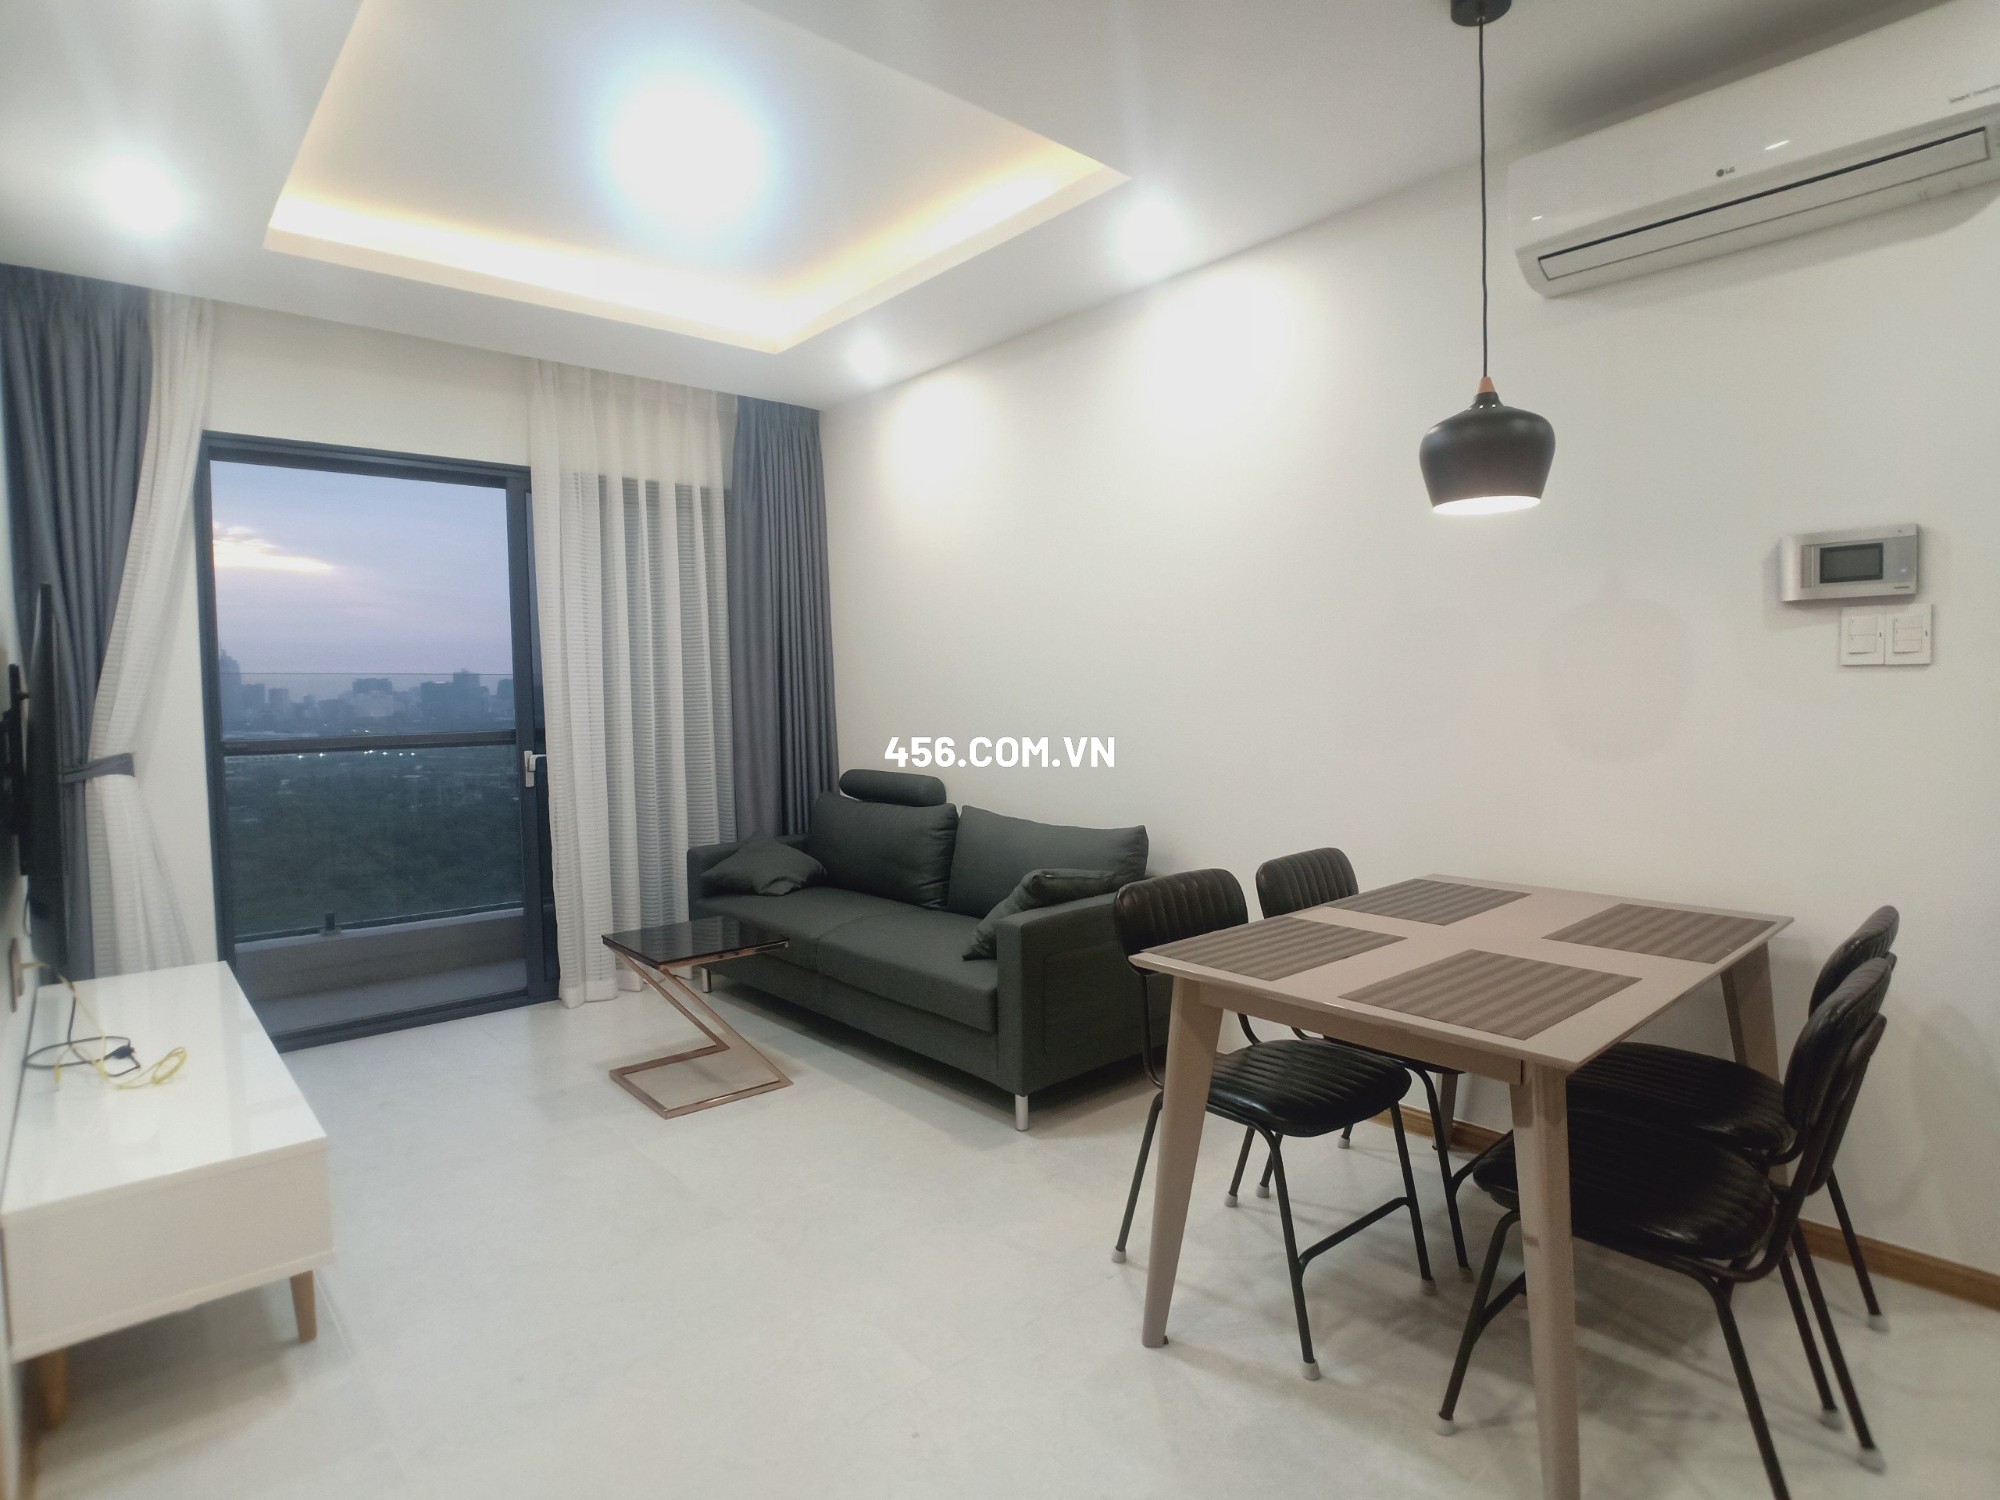 2 Bedrooms New City Thu Thiem Apartment for...